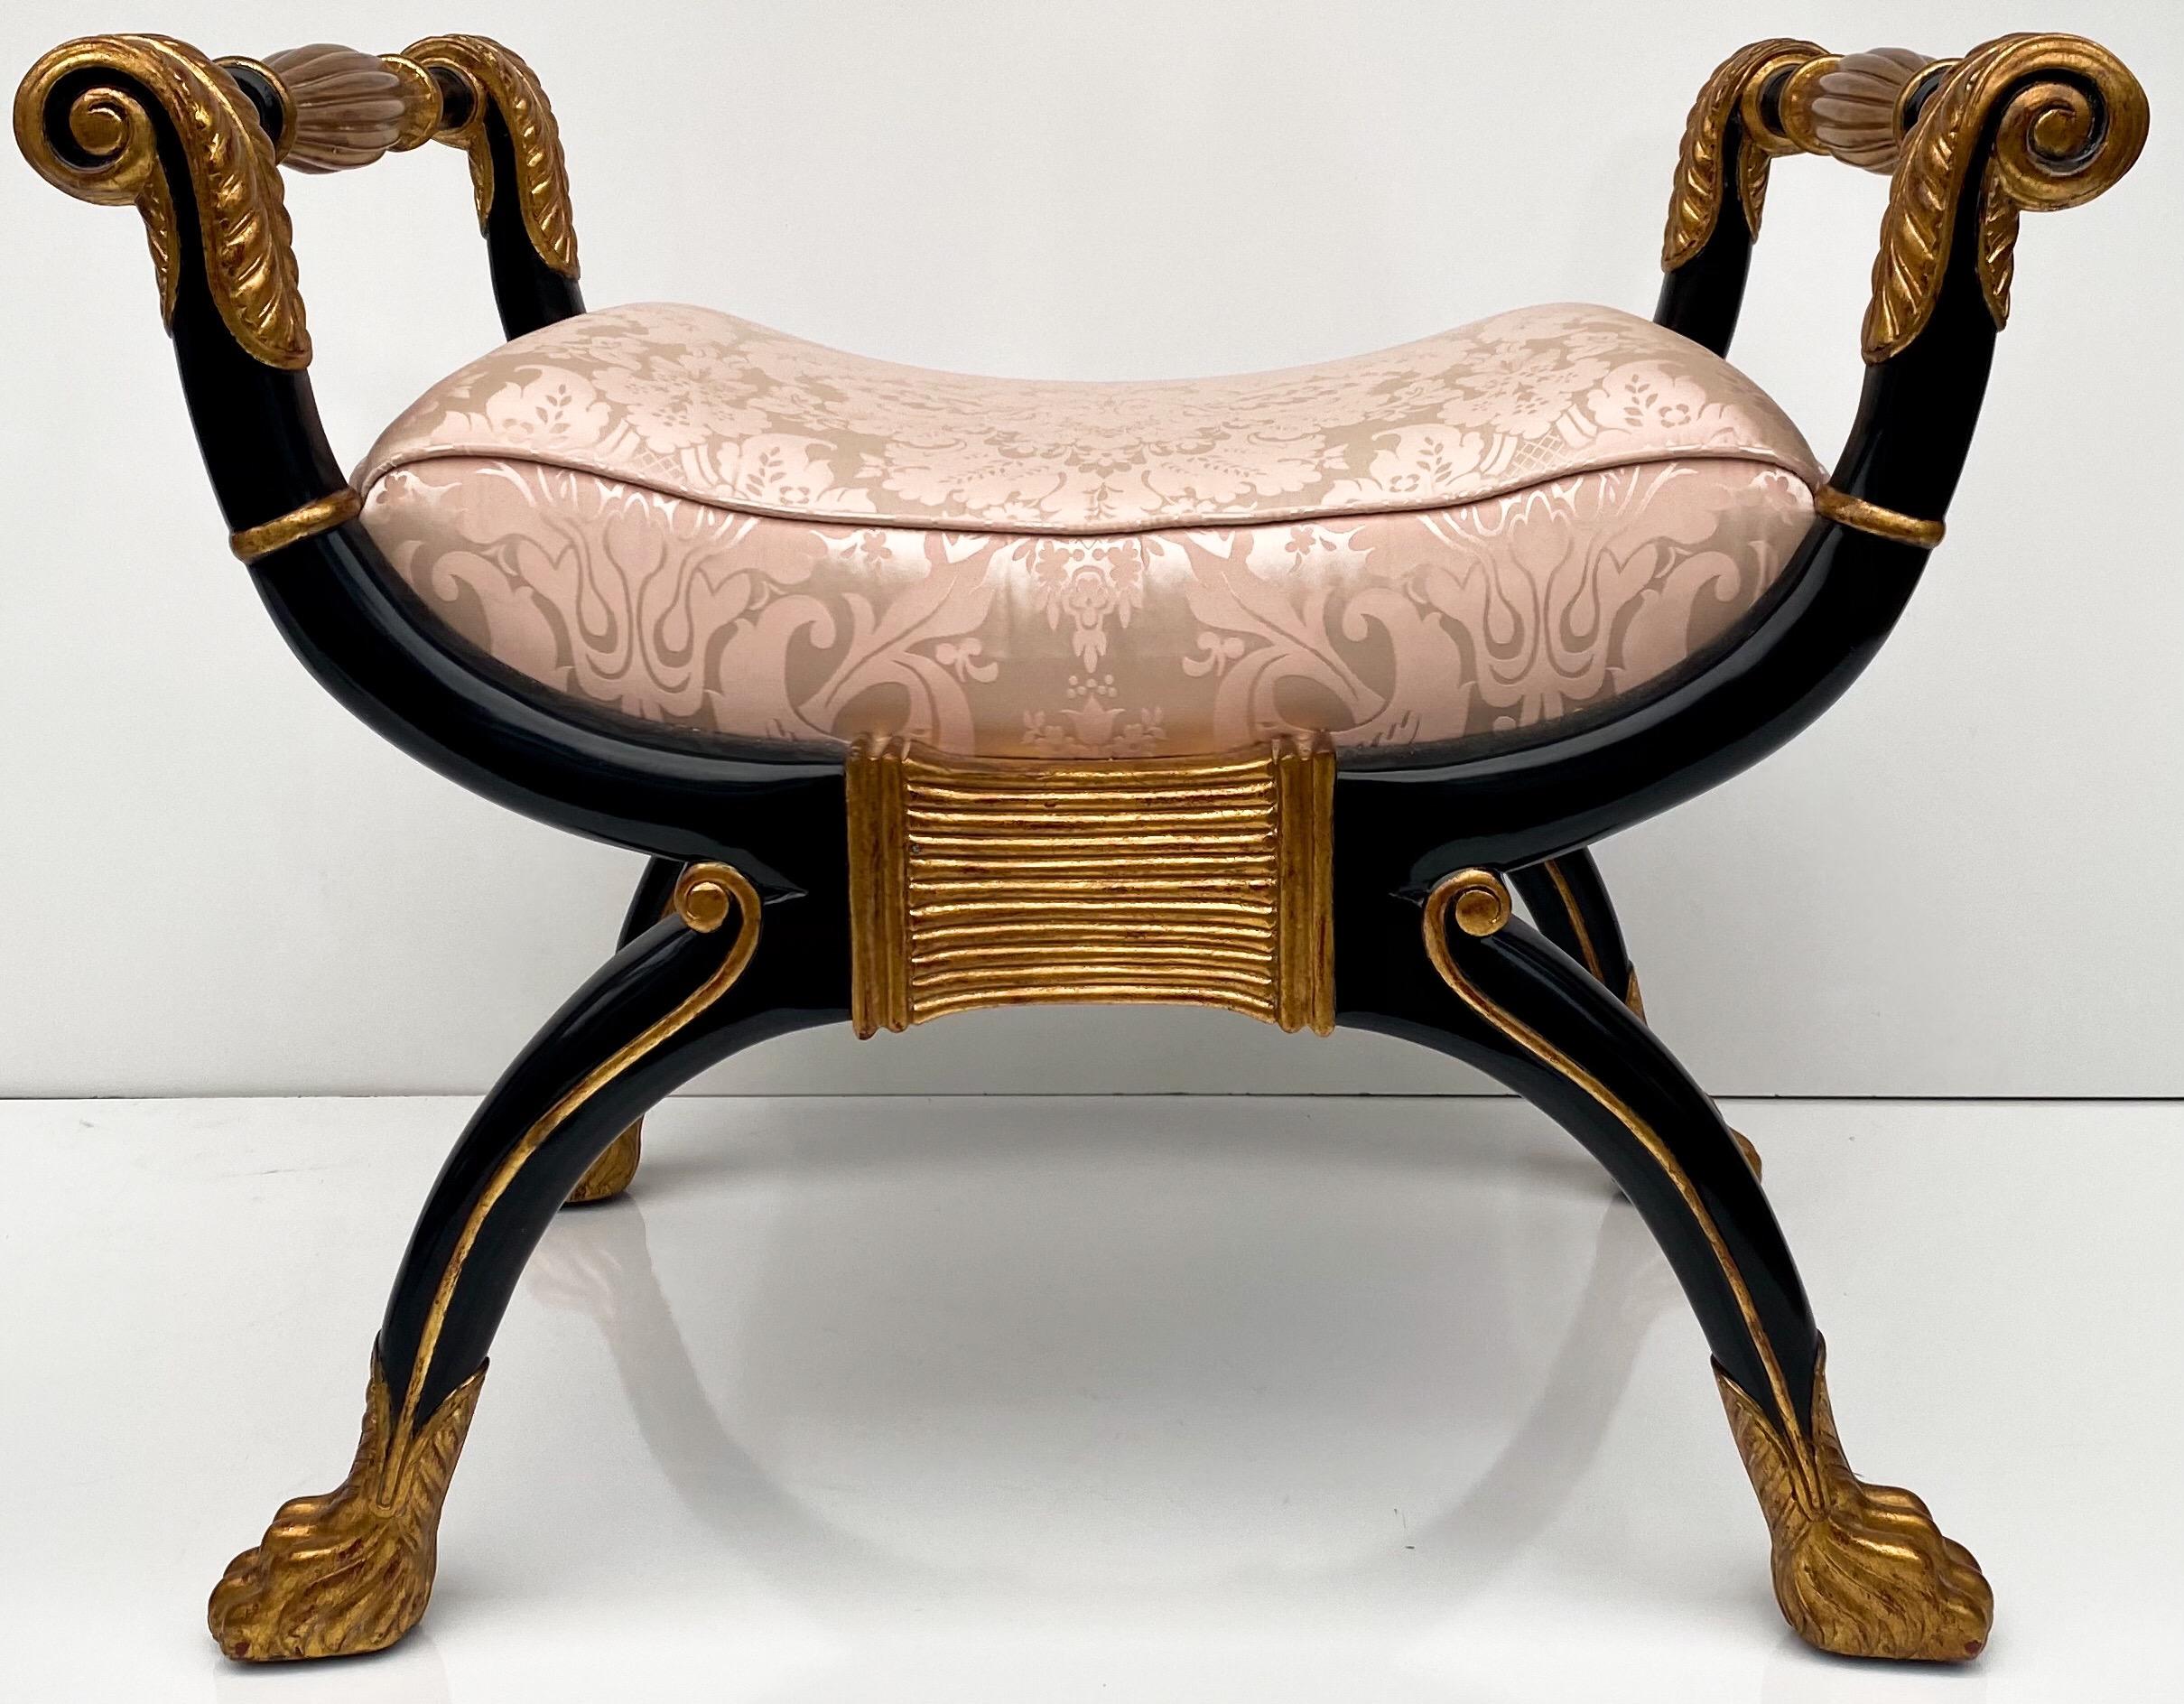 This is a pair of 1980s neoclassical style benches by Maitland-Smith. They are marked and in very good condition. The silk pink damask is vintage and only shows minor wear. The frames are ebonized with gilt accents.